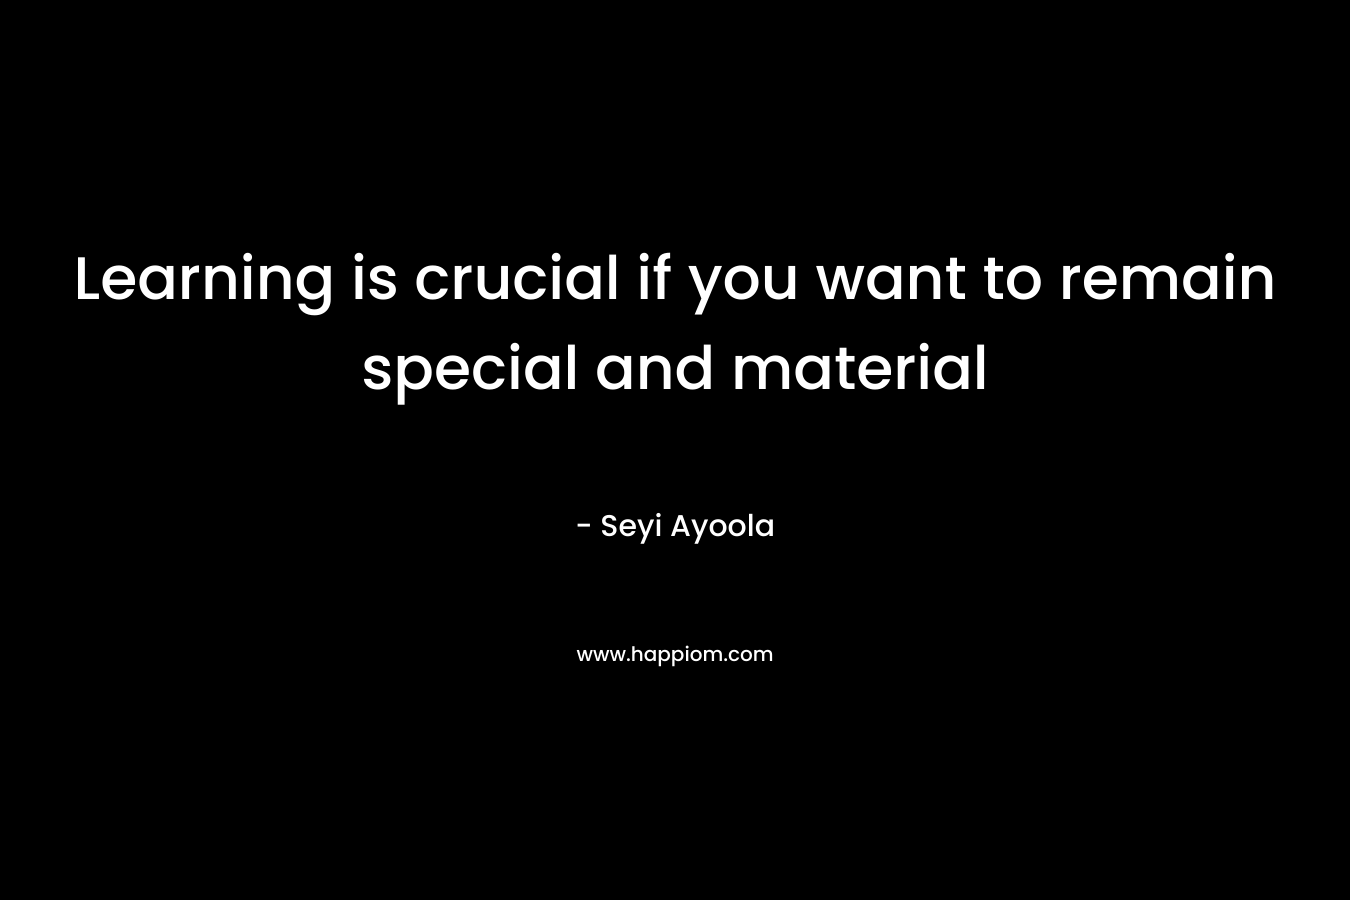 Learning is crucial if you want to remain special and material